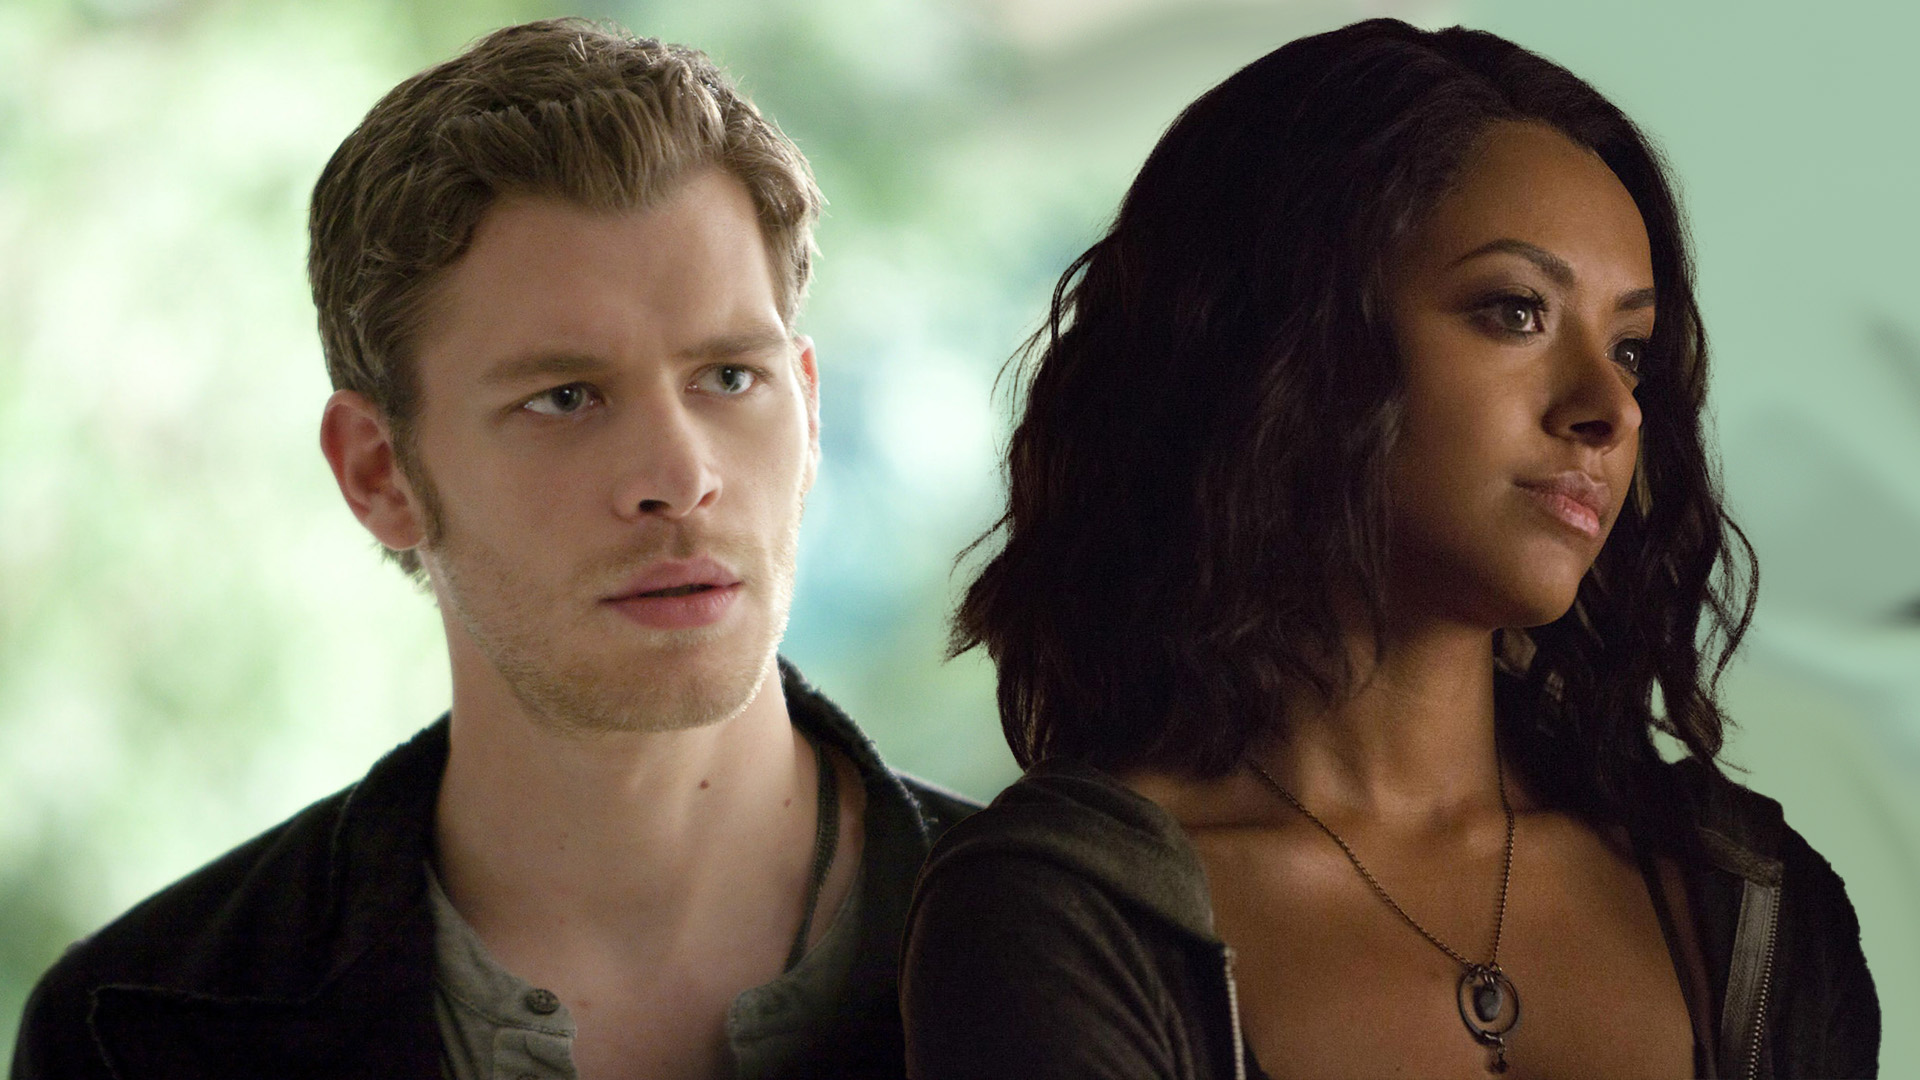 Bonnie & Klaus Relationship is The Vampire Diaries' Biggest Missed Opportunity